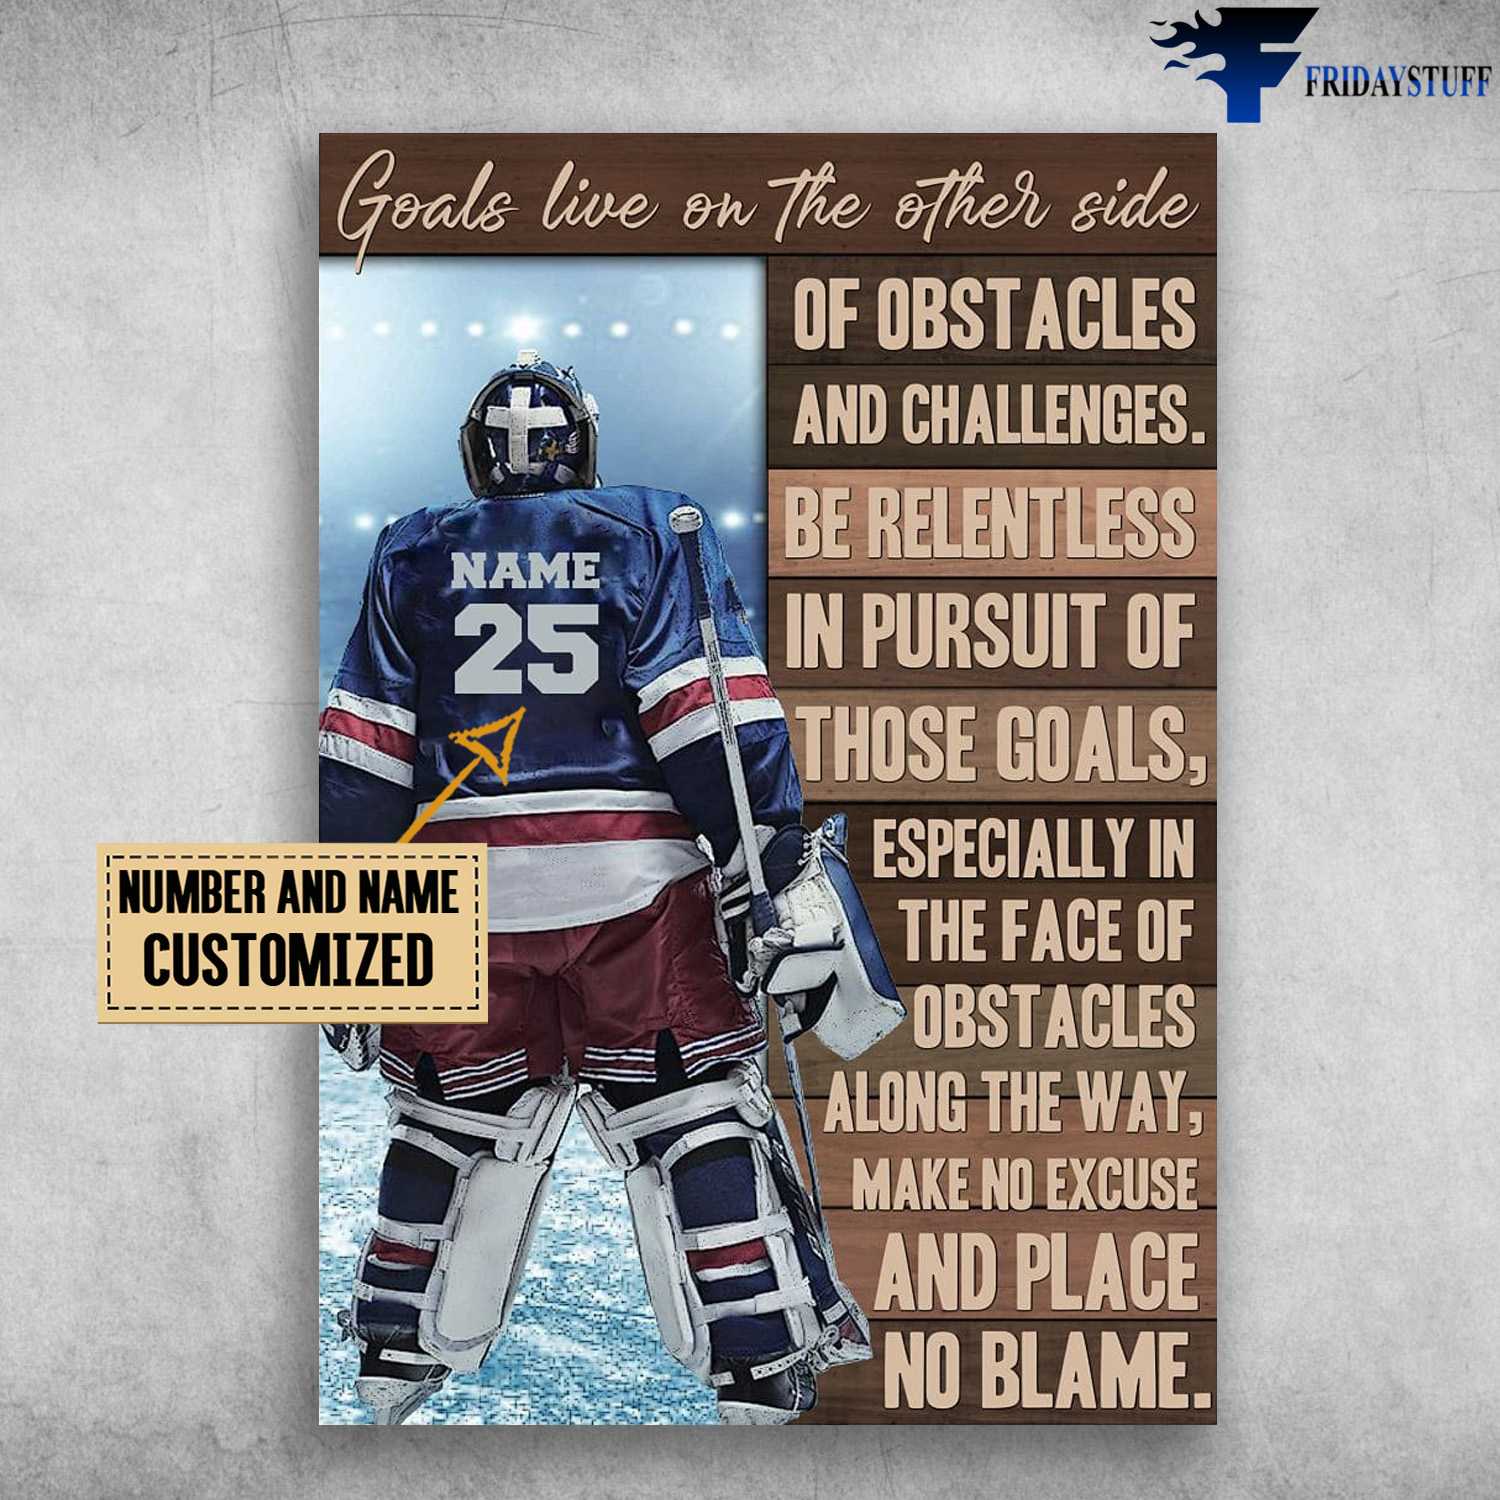 Hockey Player, Hockey Poster, Goals Live On The Other Side, Of Obstacles And Challenges, Be Relentless In Pursuit Of Those Goals